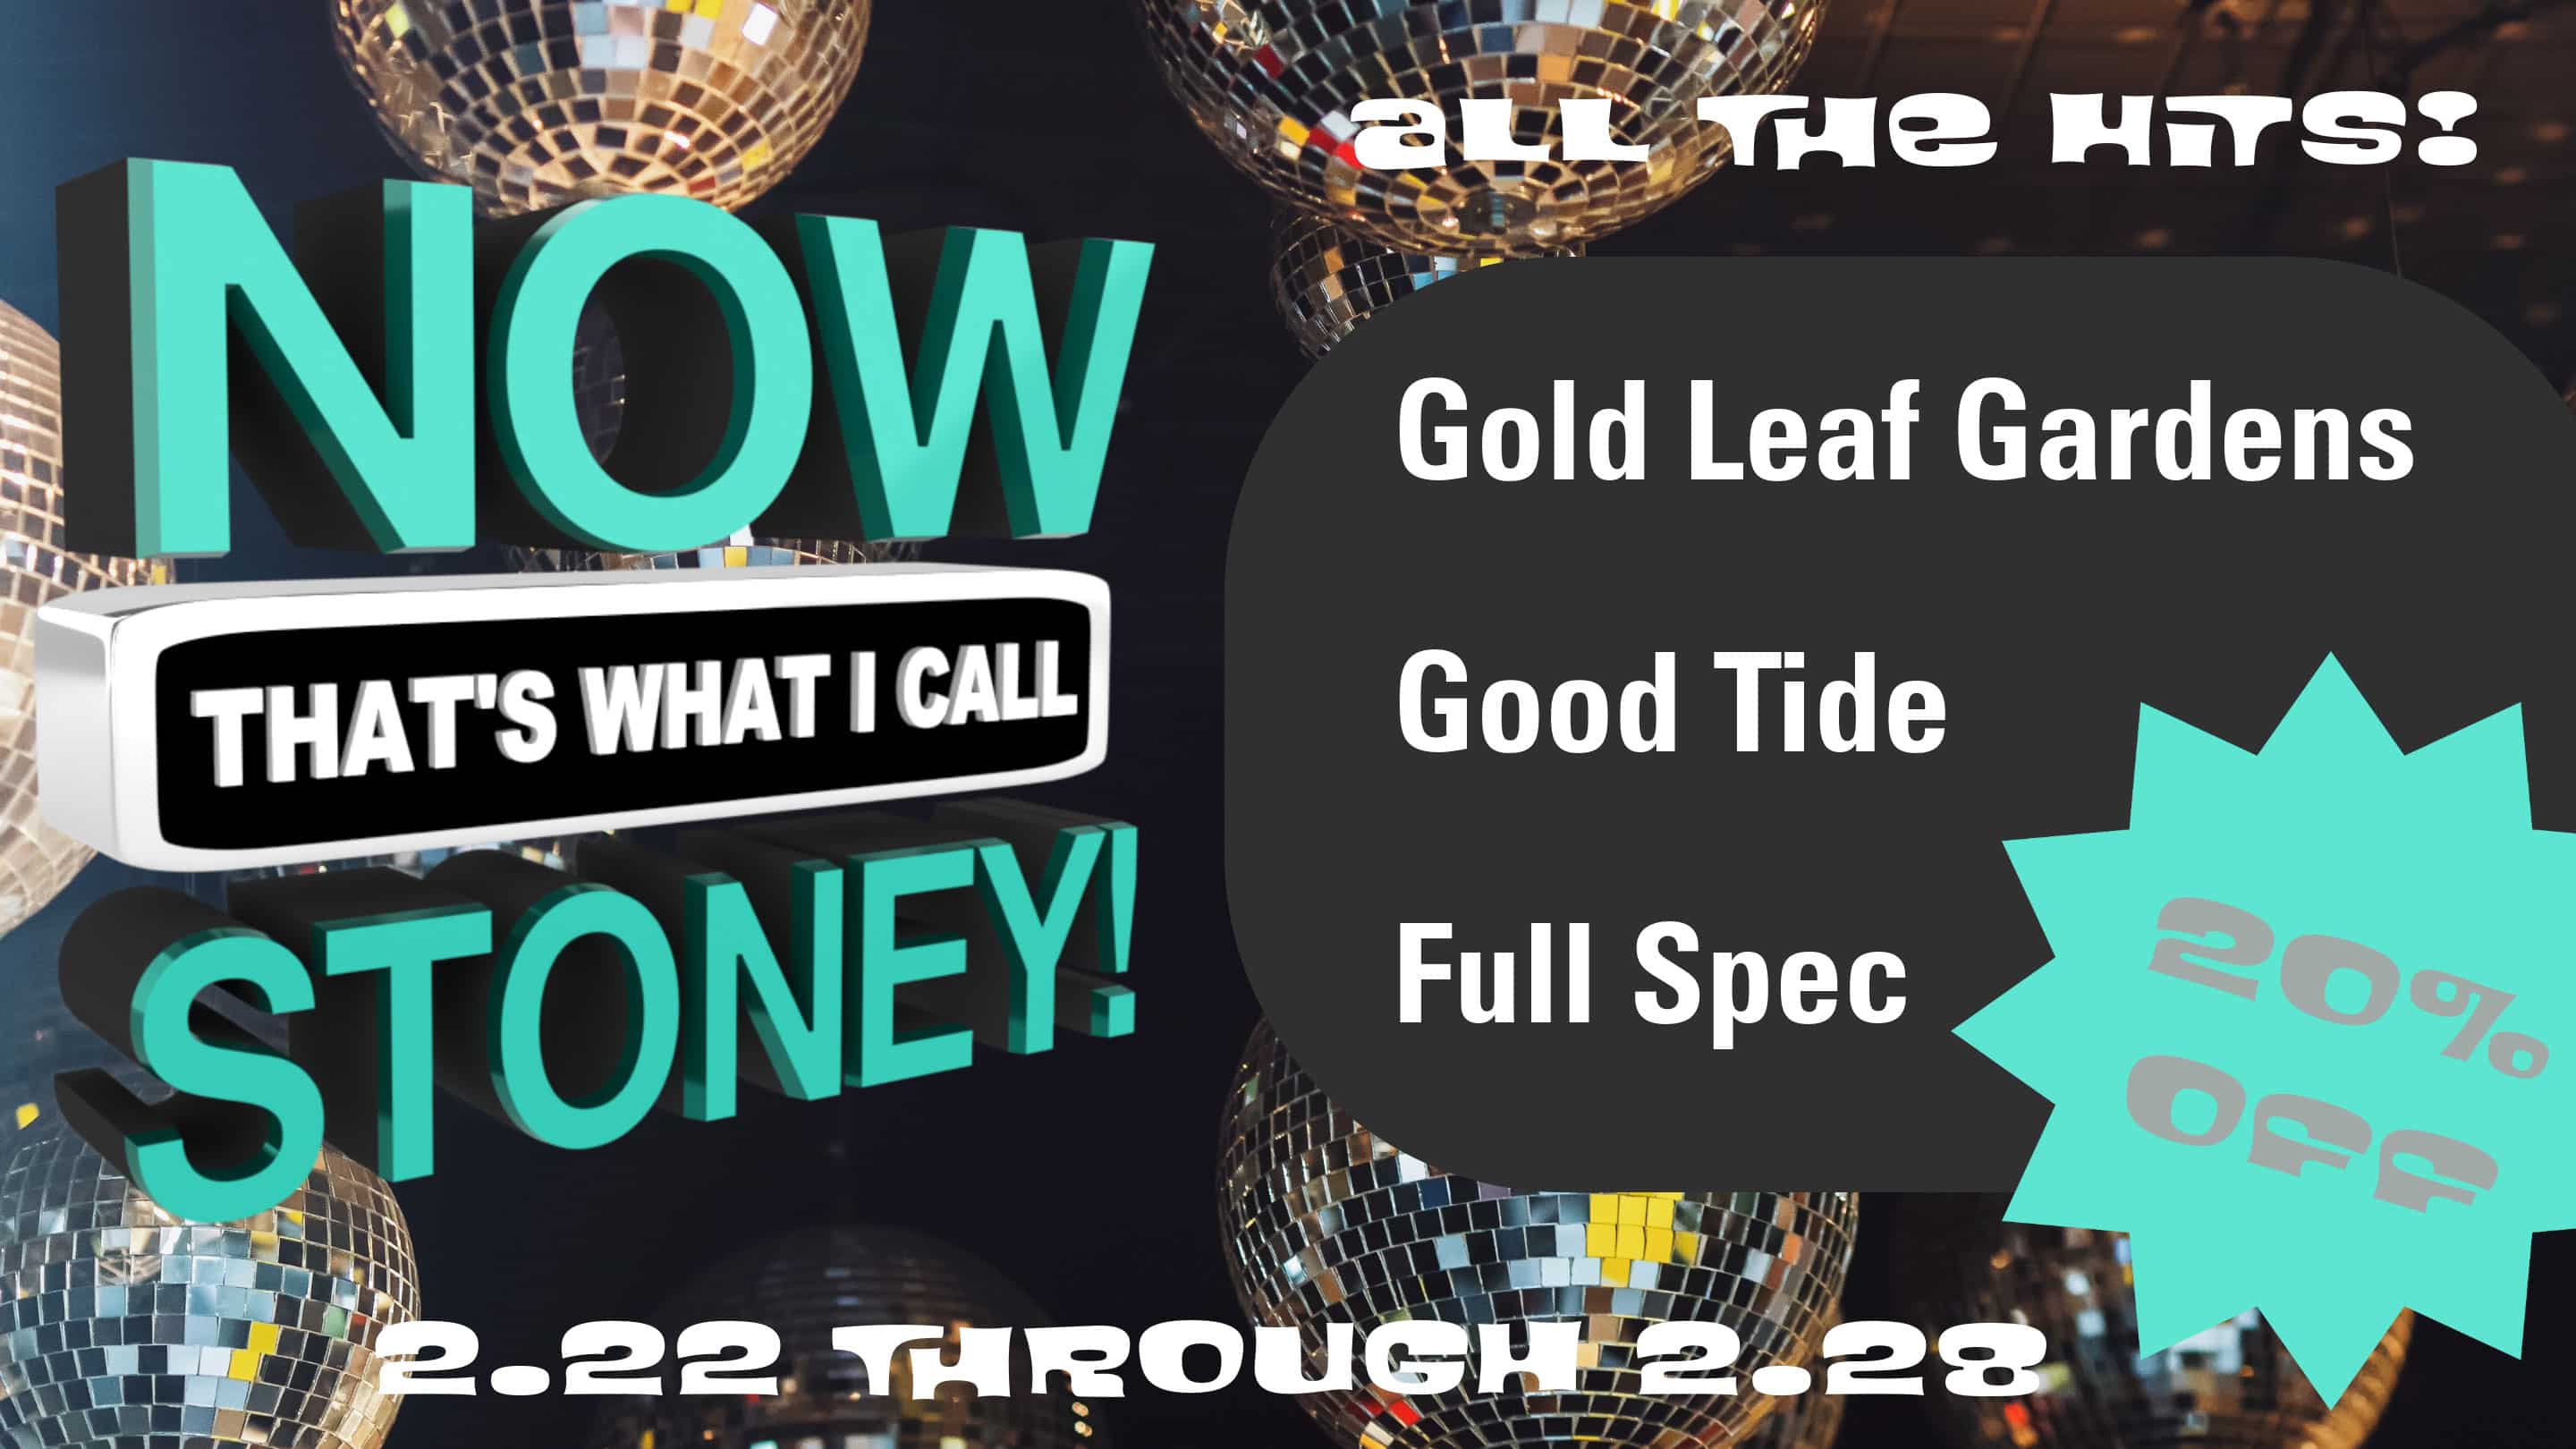 Now that’s what I call stoney! Take 20% off all Gold Leaf Gardens, Good Tide, and Full Spec products, now through February 28th.